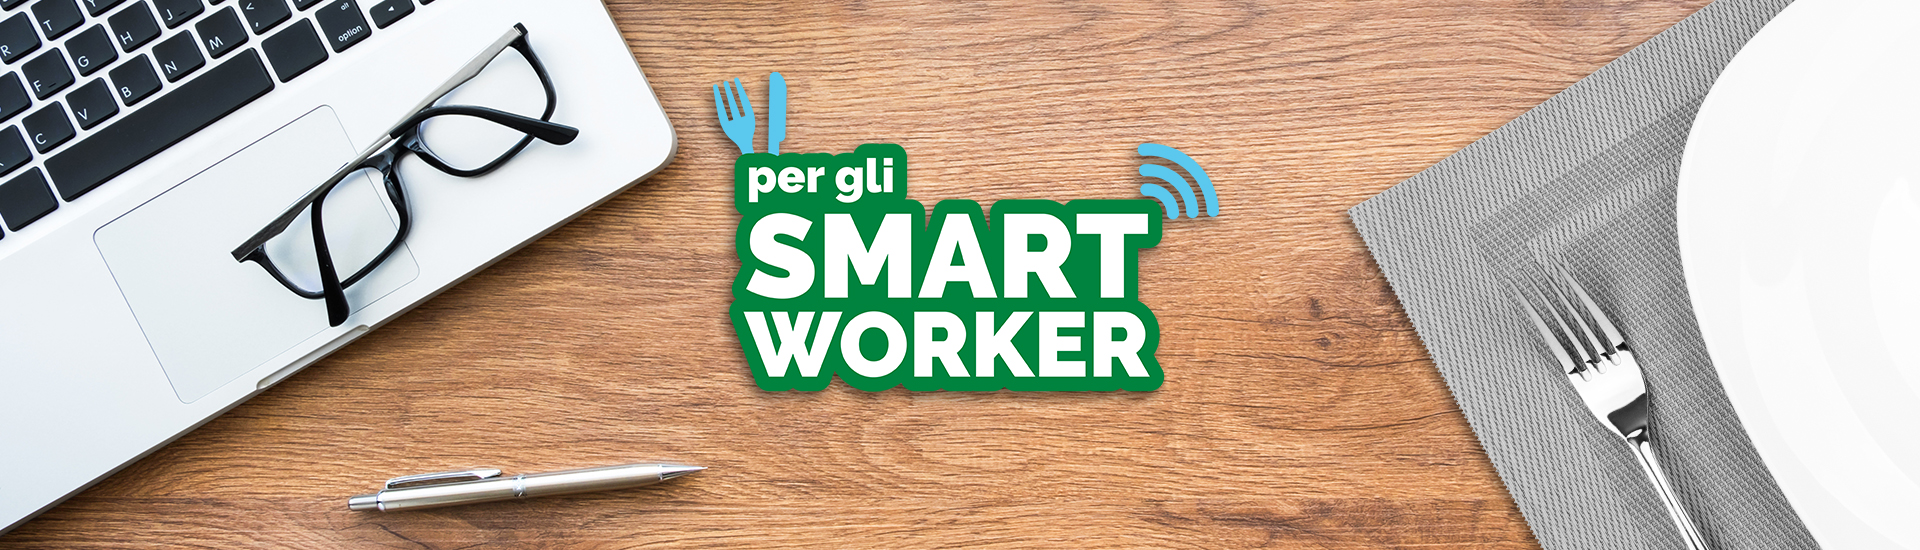 Smartworkers